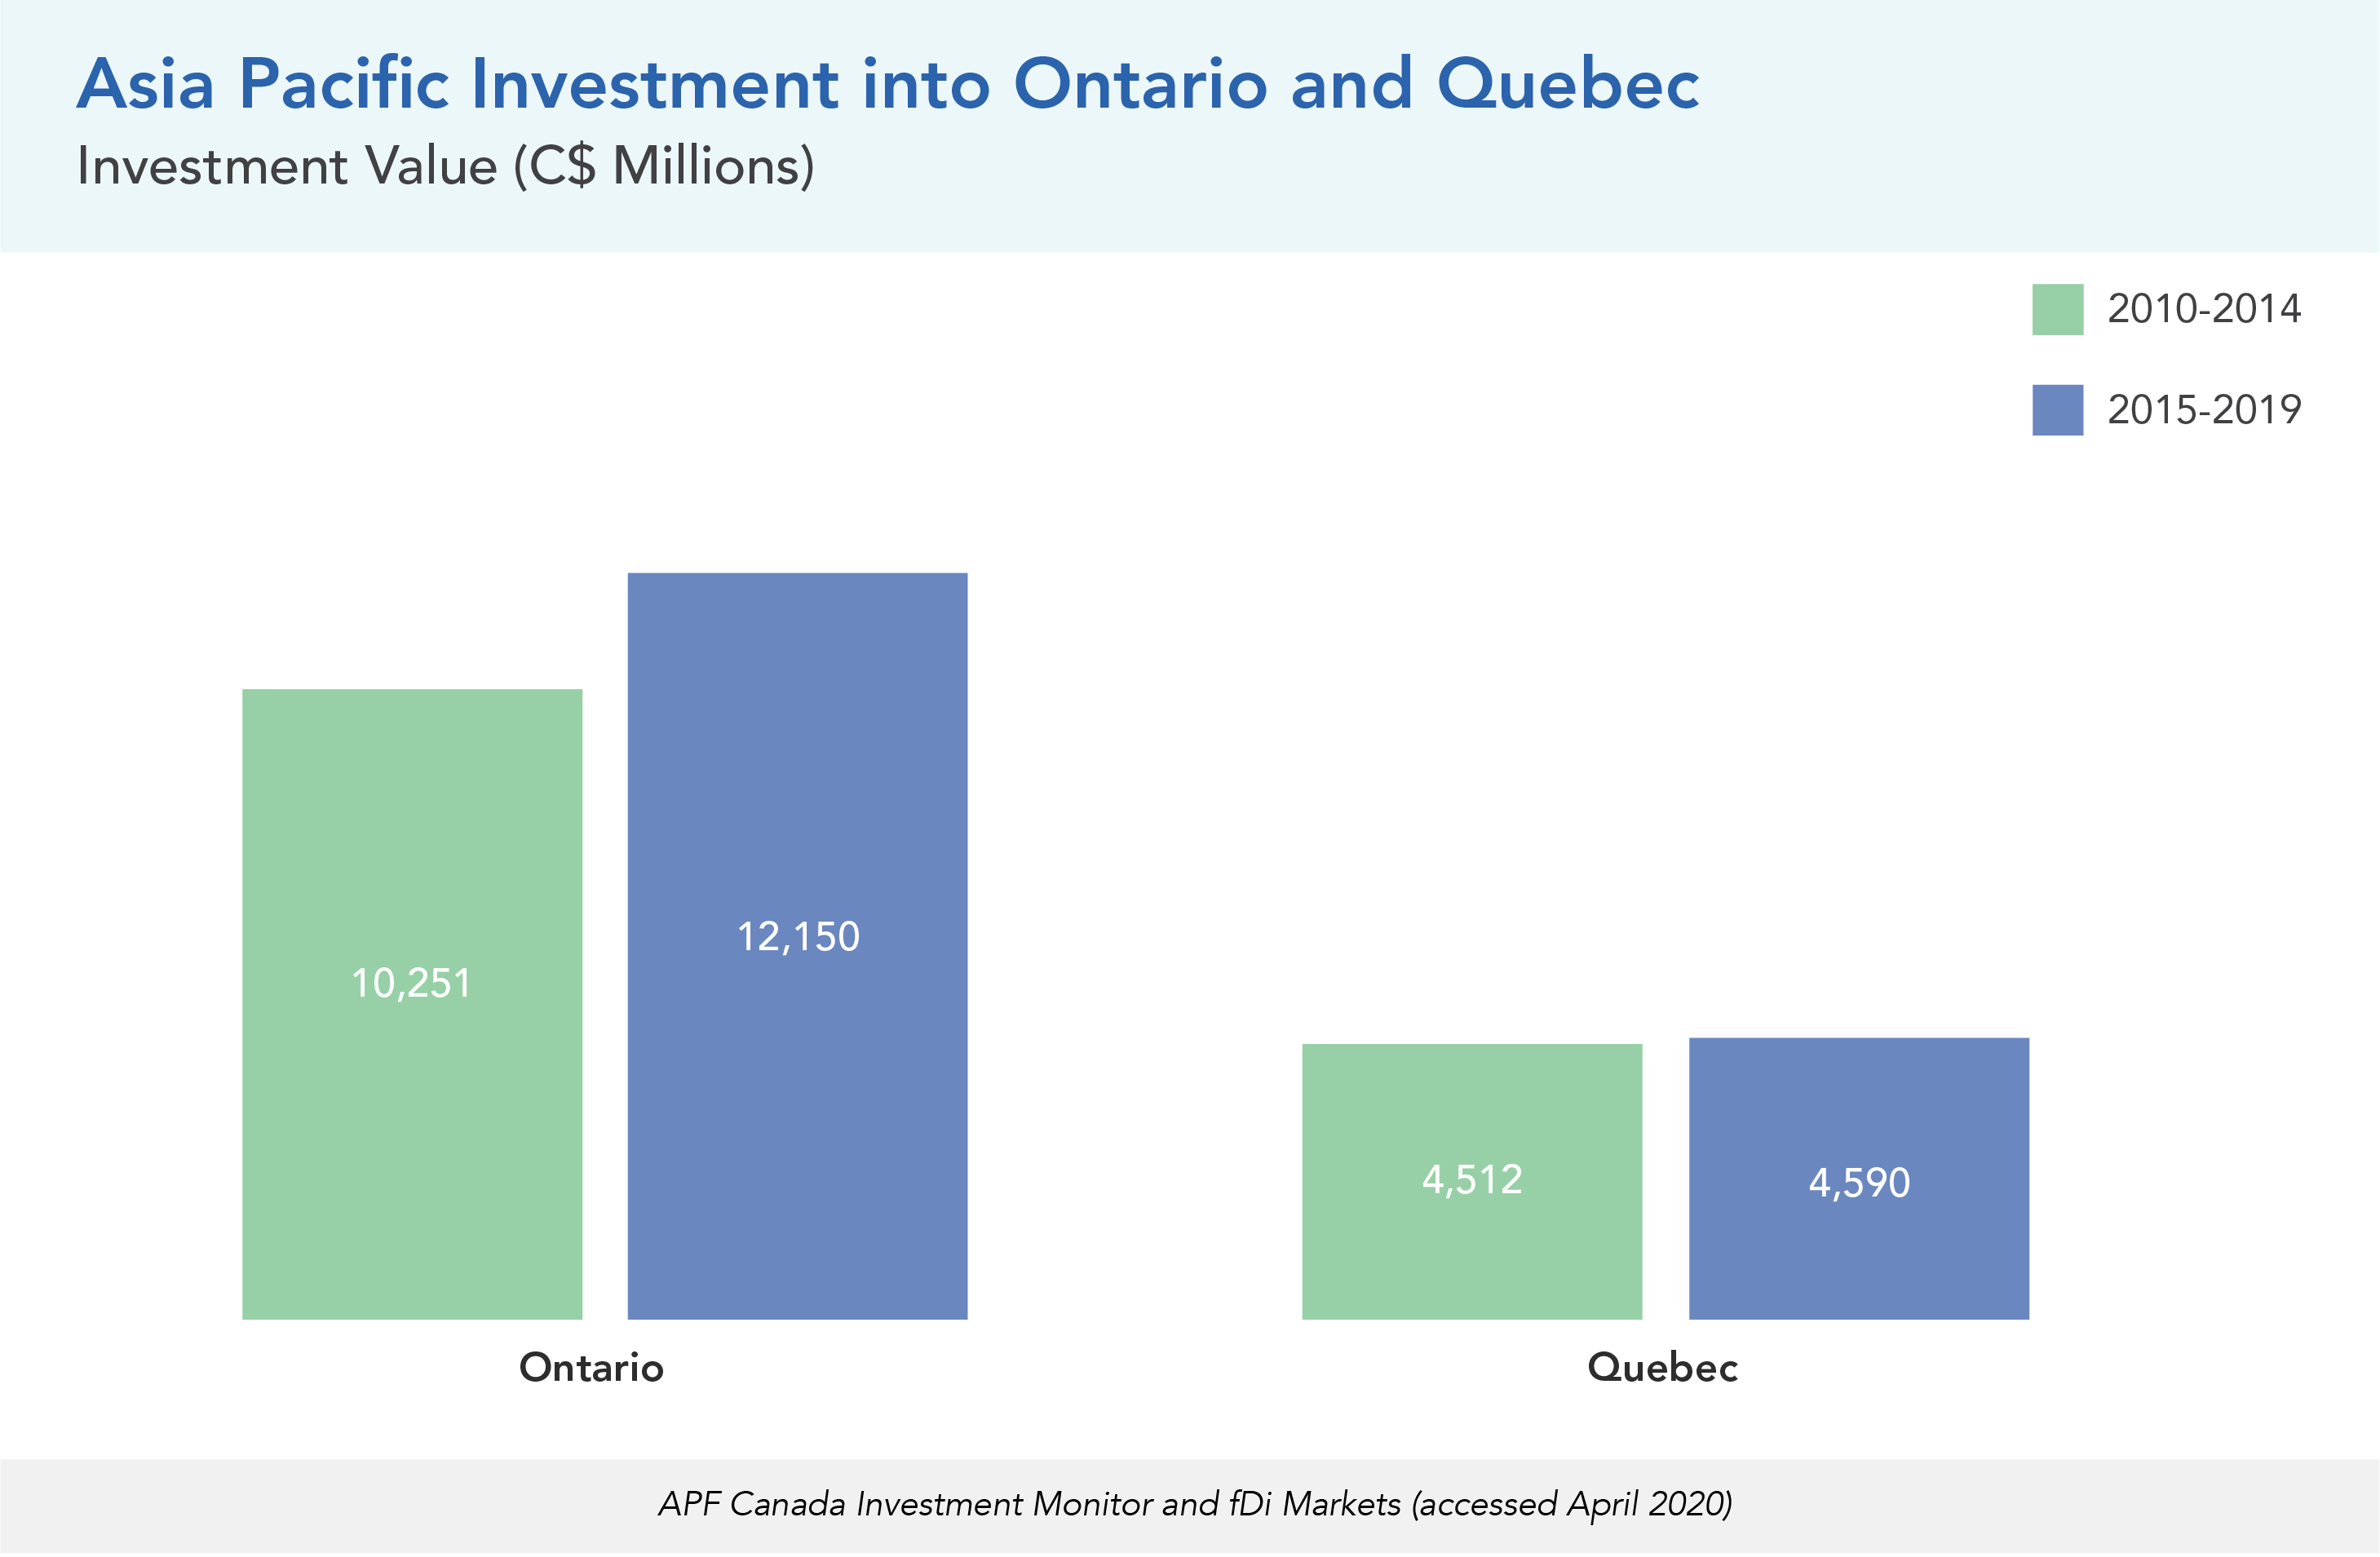 Asia Pacific Investment into Ontario and Quebec